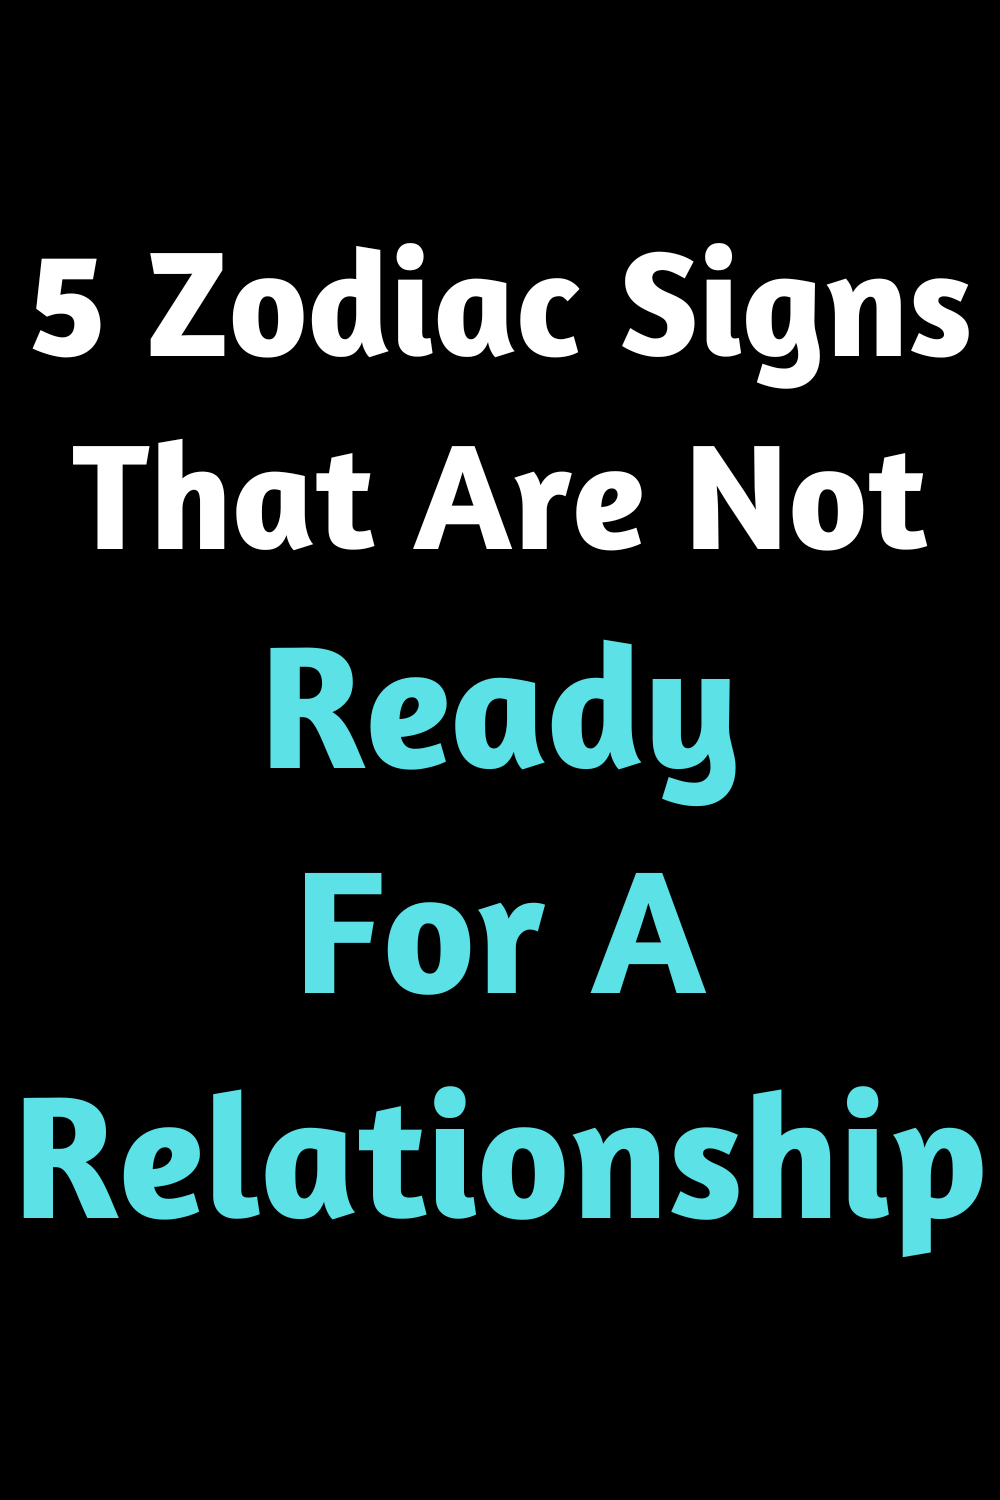 5 Zodiac Signs That Are Not Ready For A Relationship